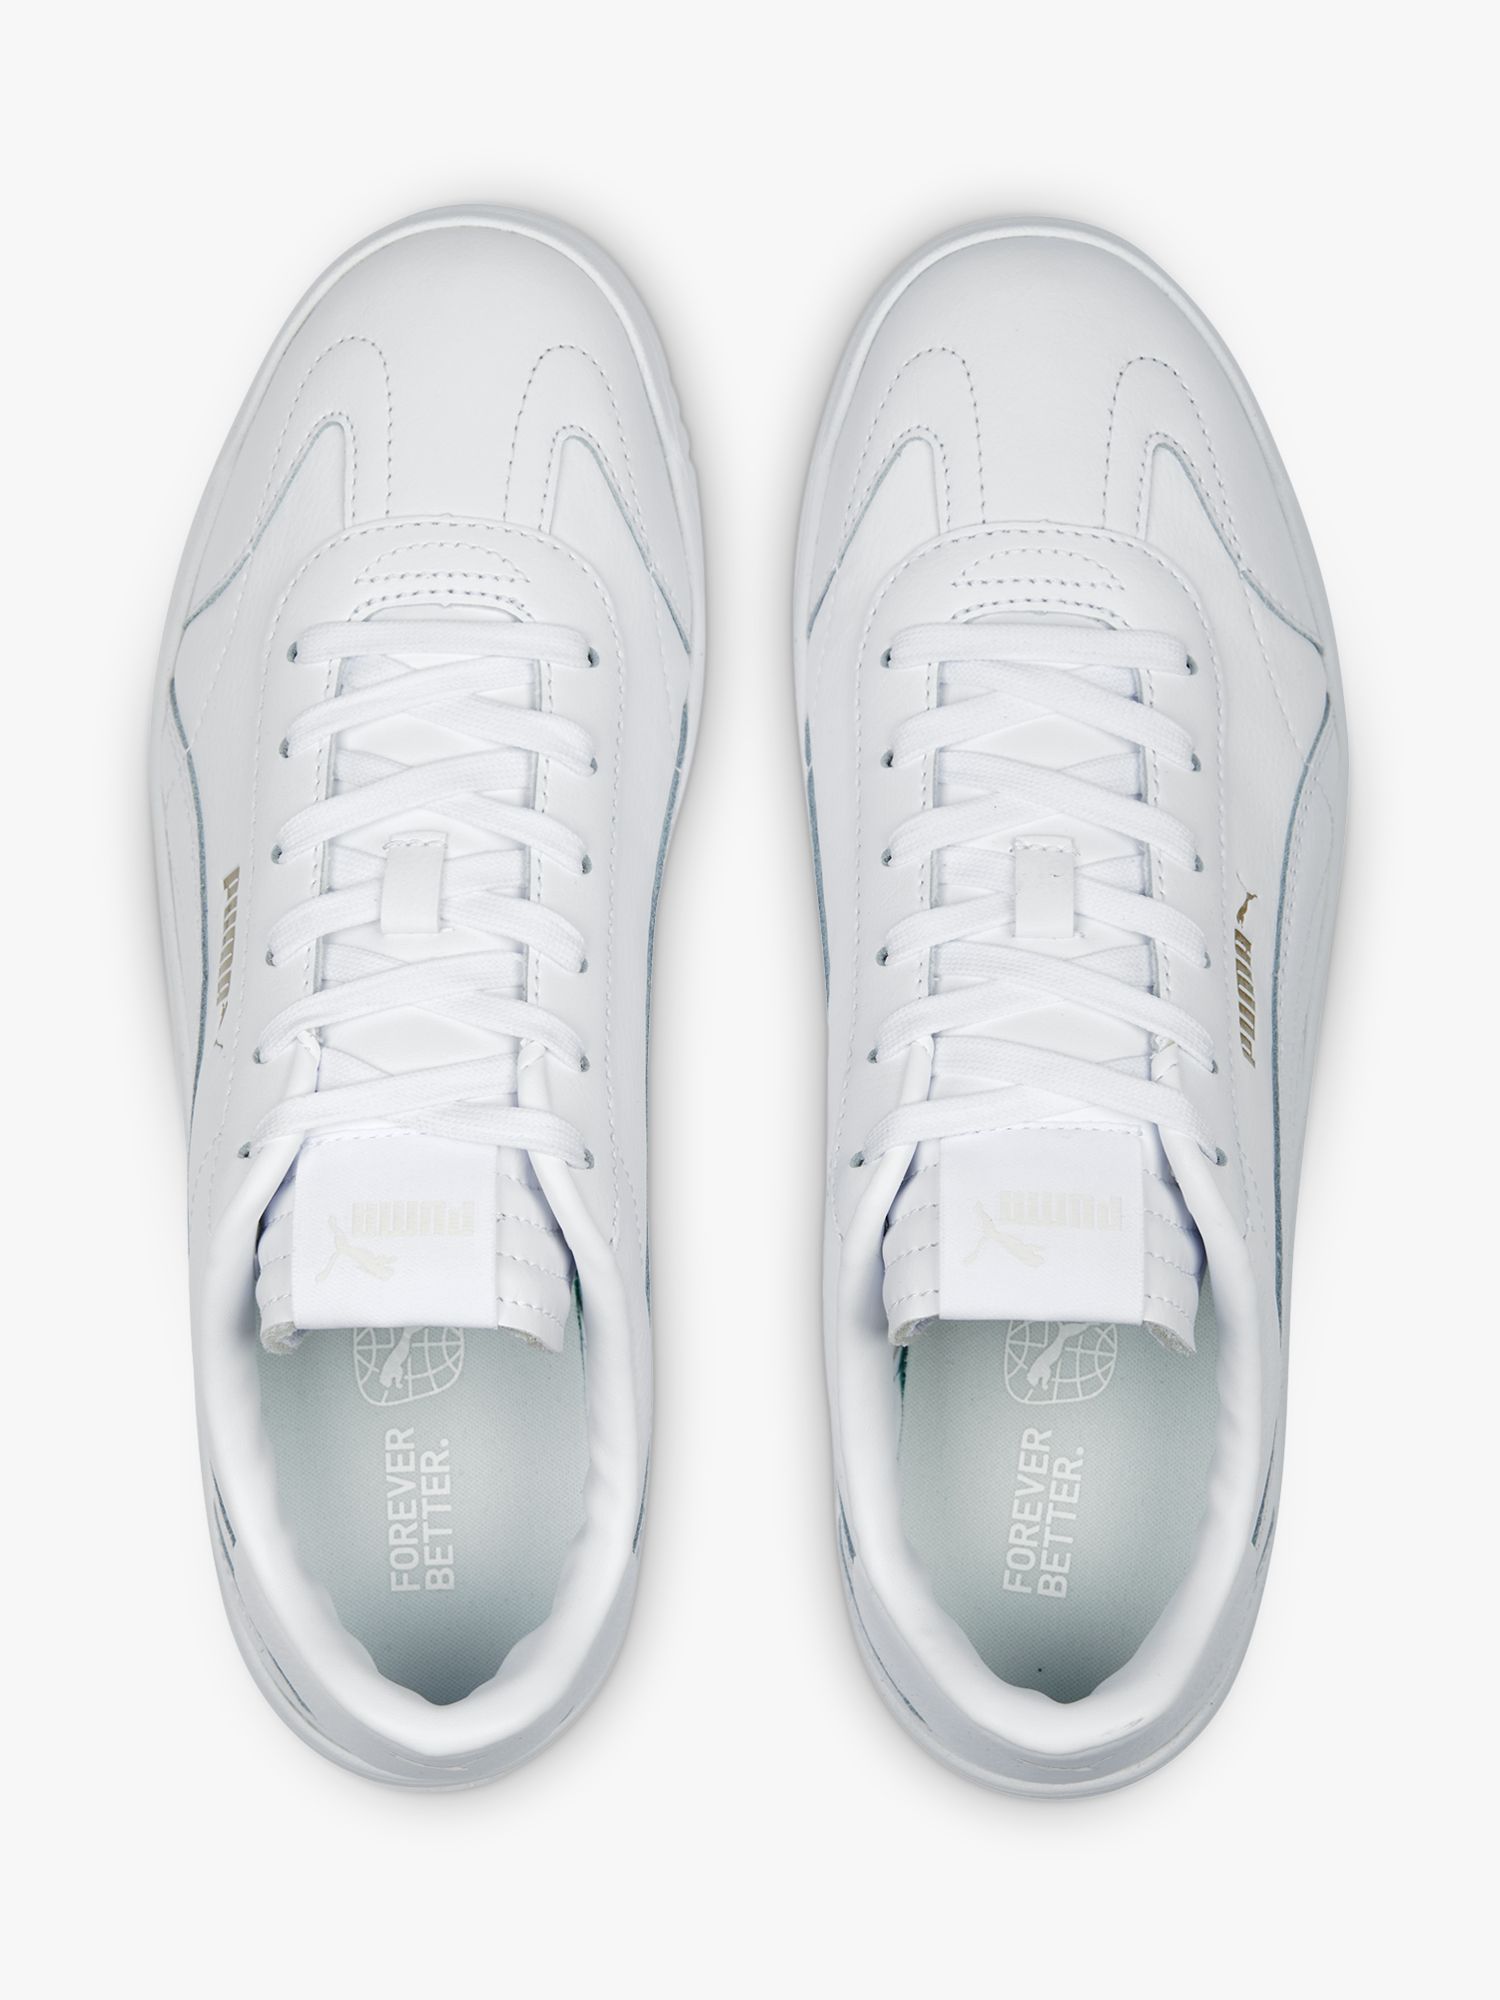 PUMA Club 5v5 Leather Lace Up Trainers, White, 7